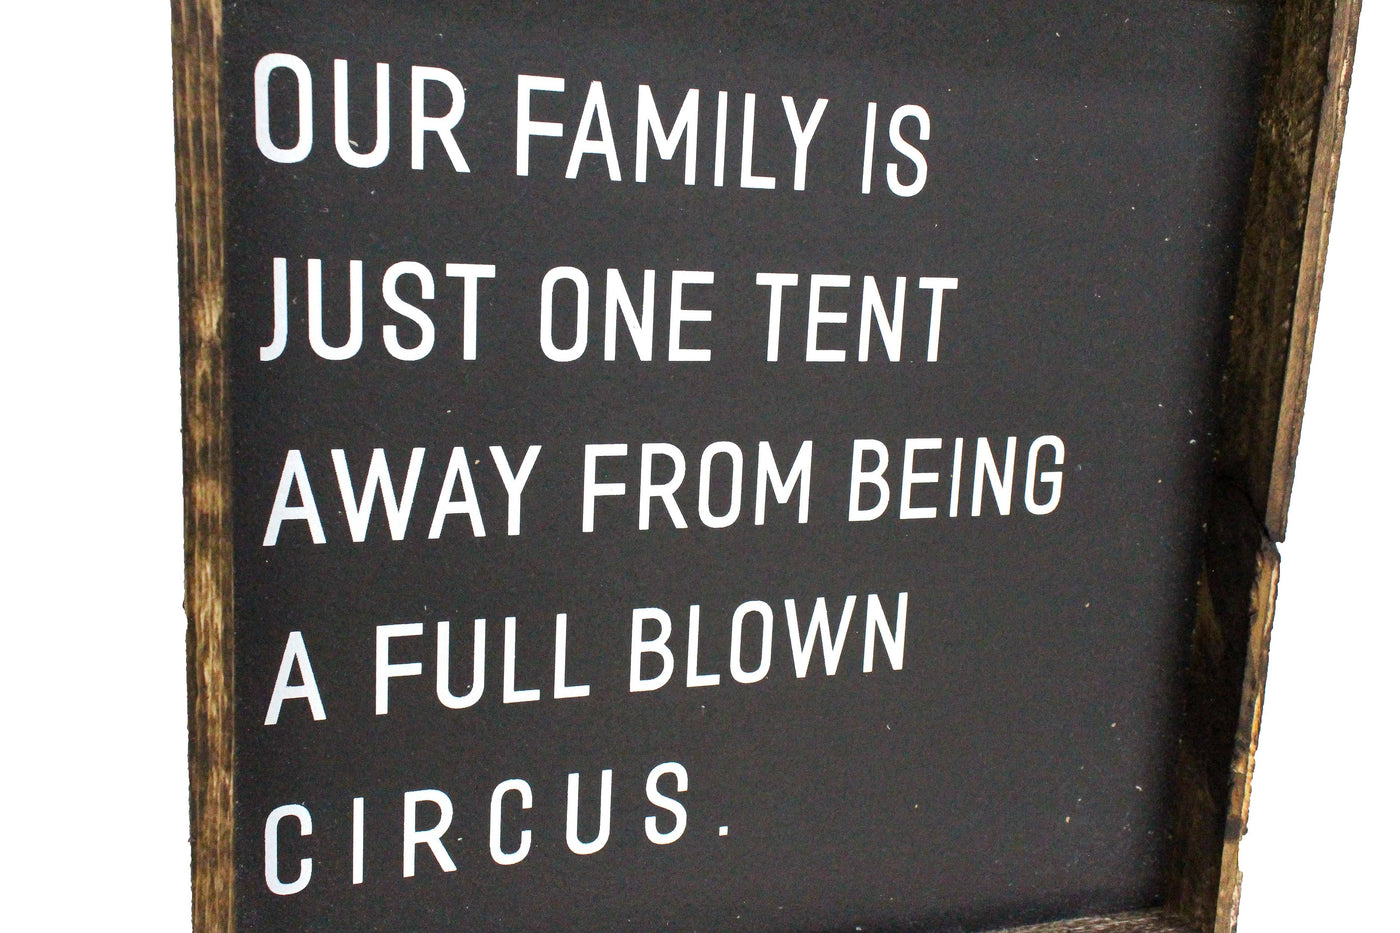 Our Family is Just One Tent Away Wood Sign: Clay